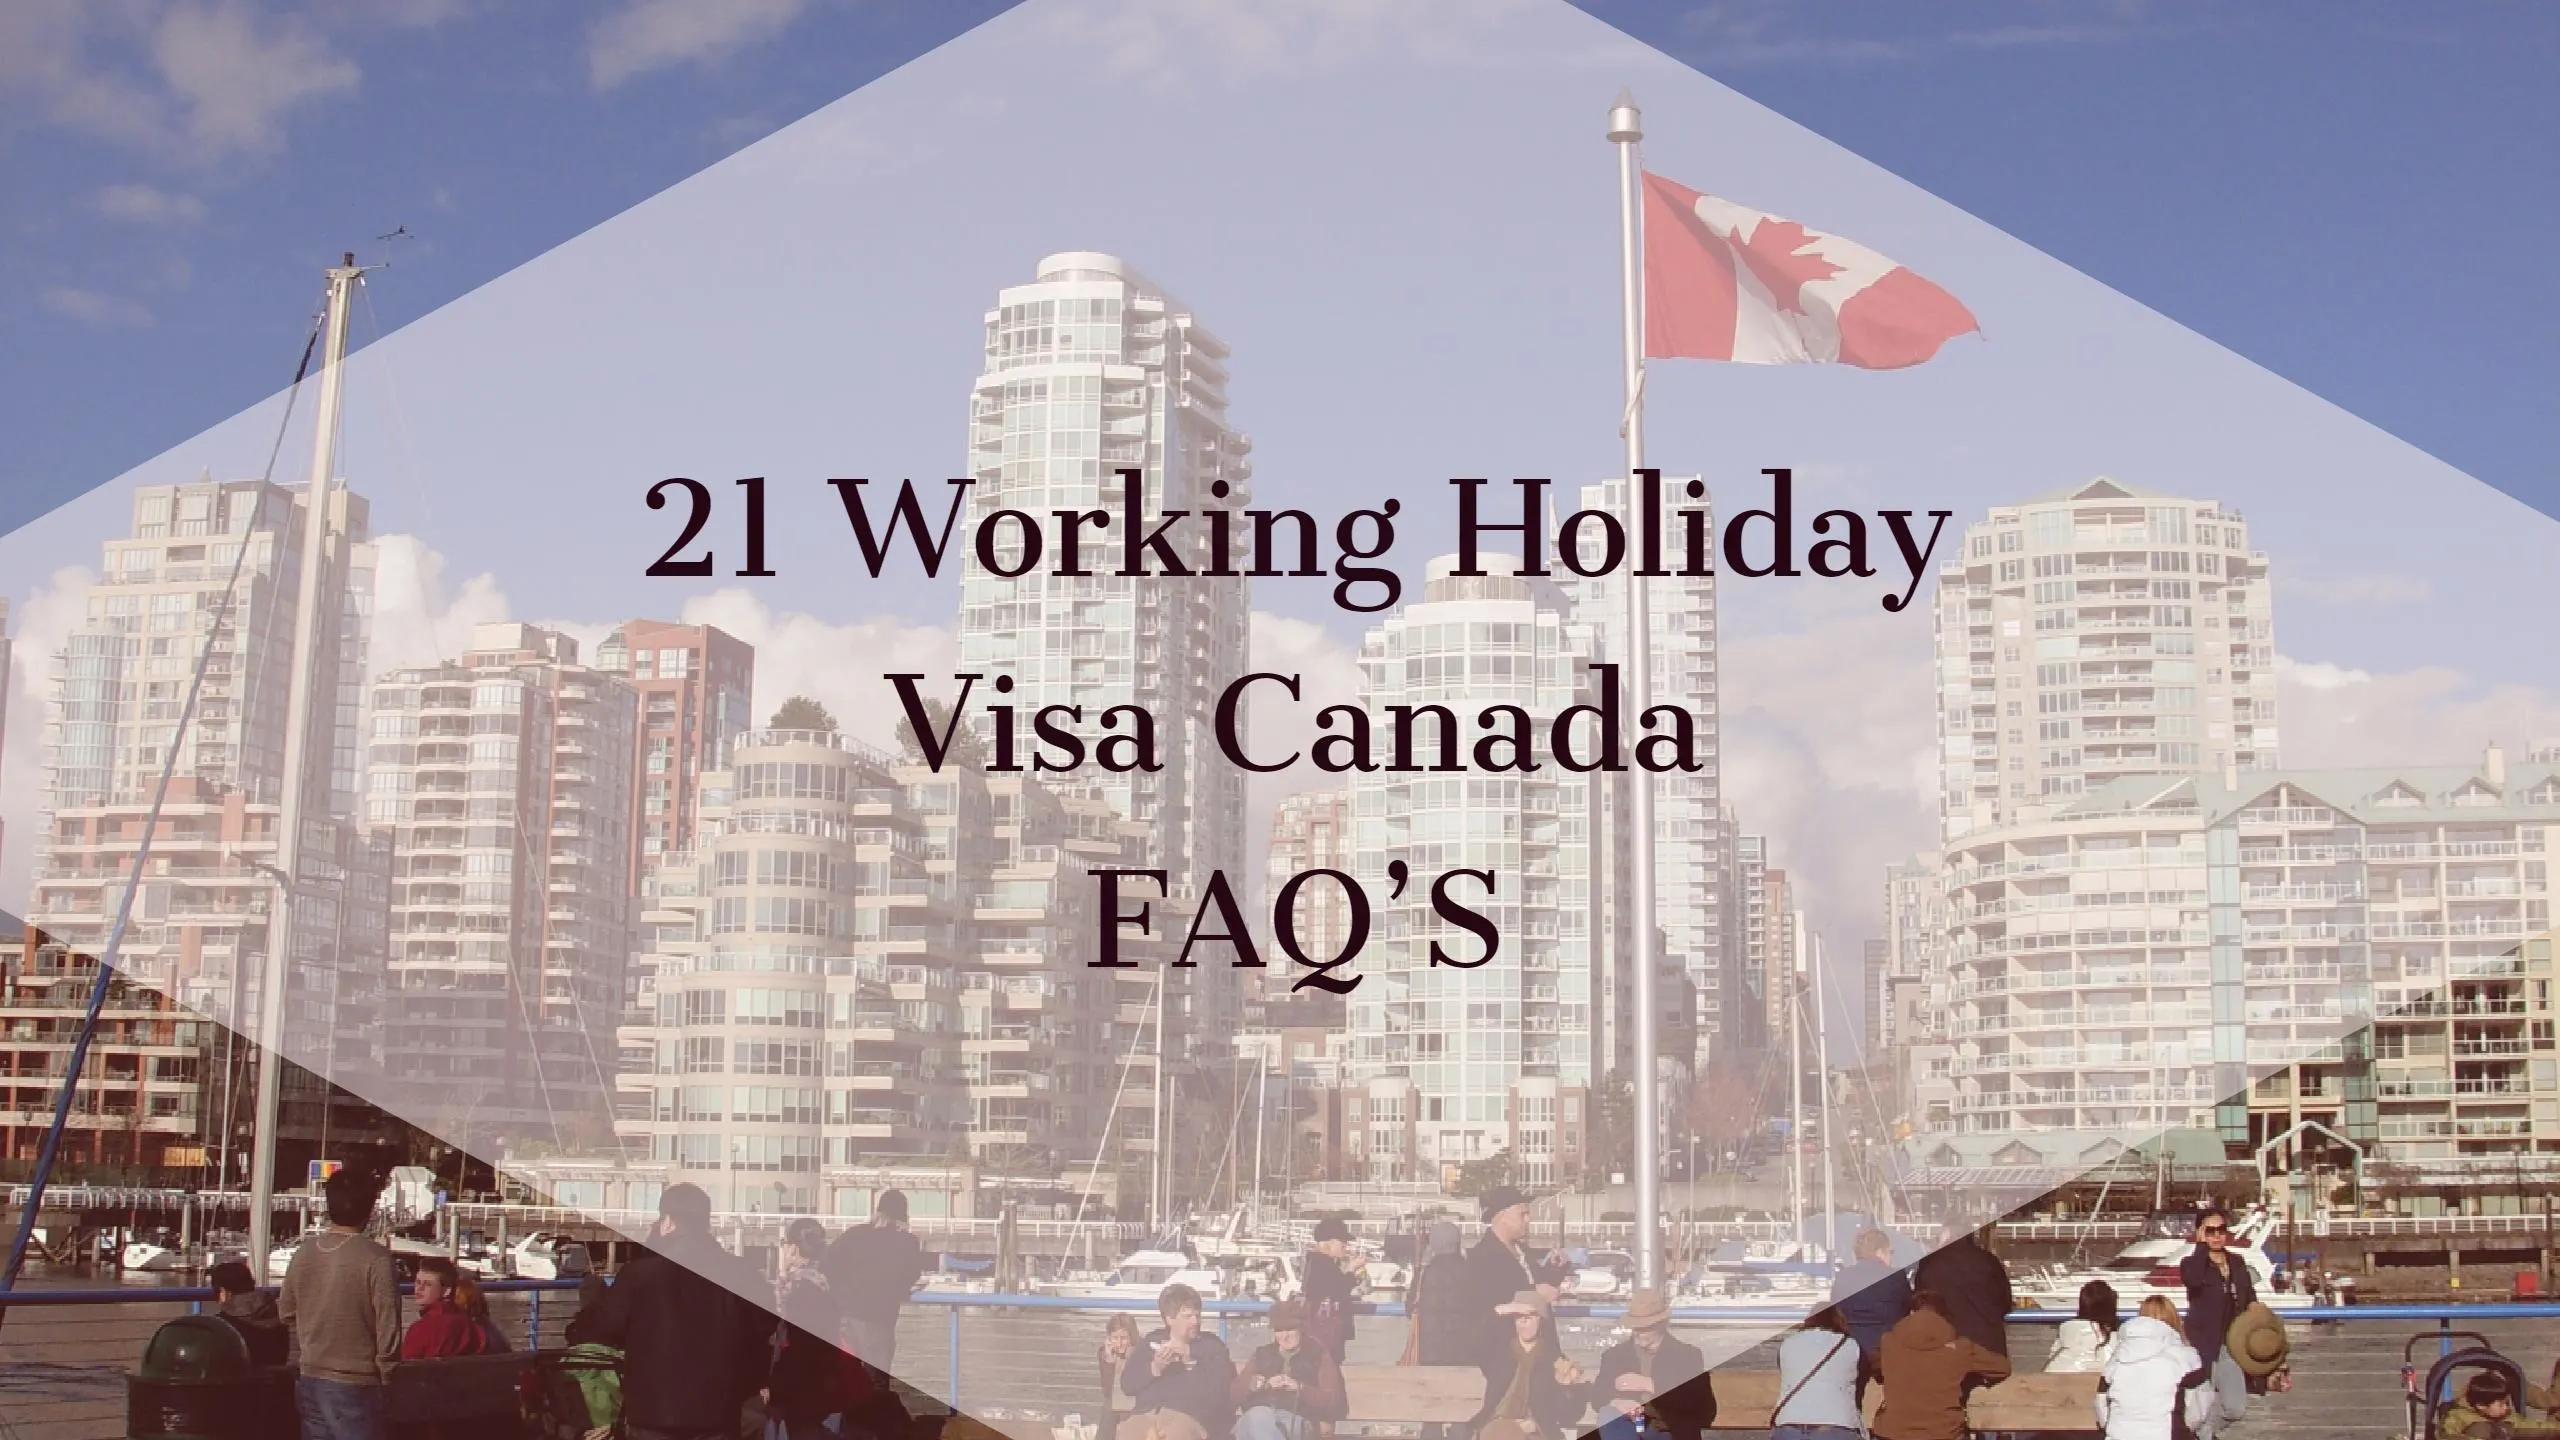 Most frequent questions about working holiday visa Canada.